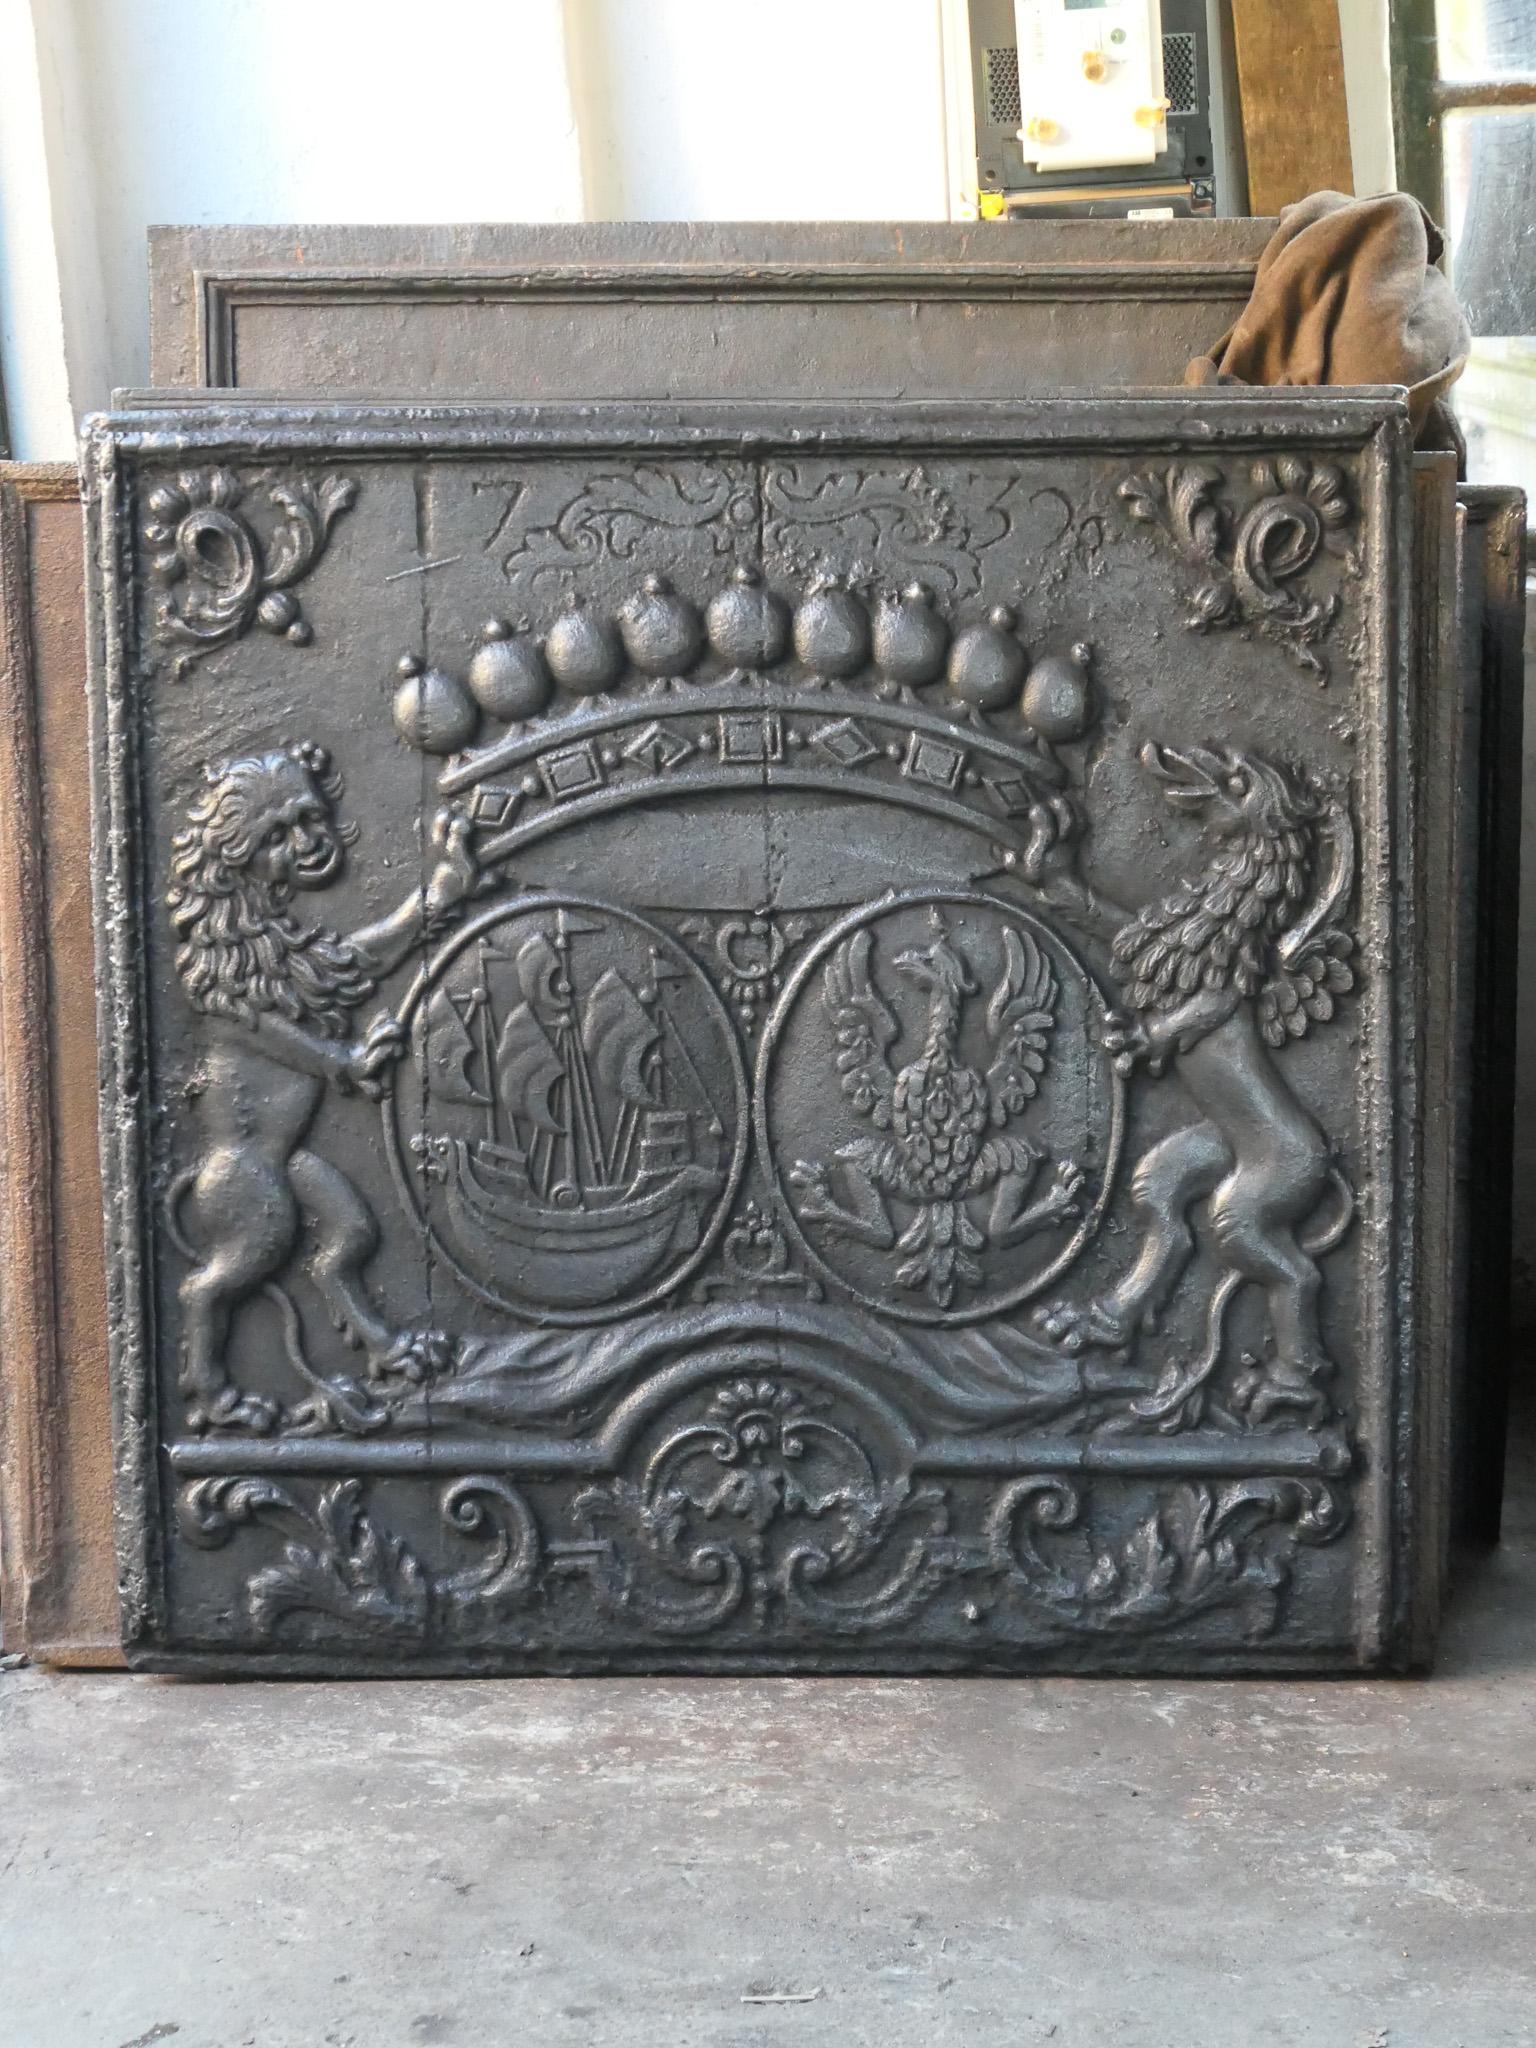 Beautiful 18th century French Louis XIV period fireback with a coat of arms. The date of production, 1732, is also cast in the fireback.

The fireback is made of cast iron and has a black patina. It is in a good condition, no cracks.

This large